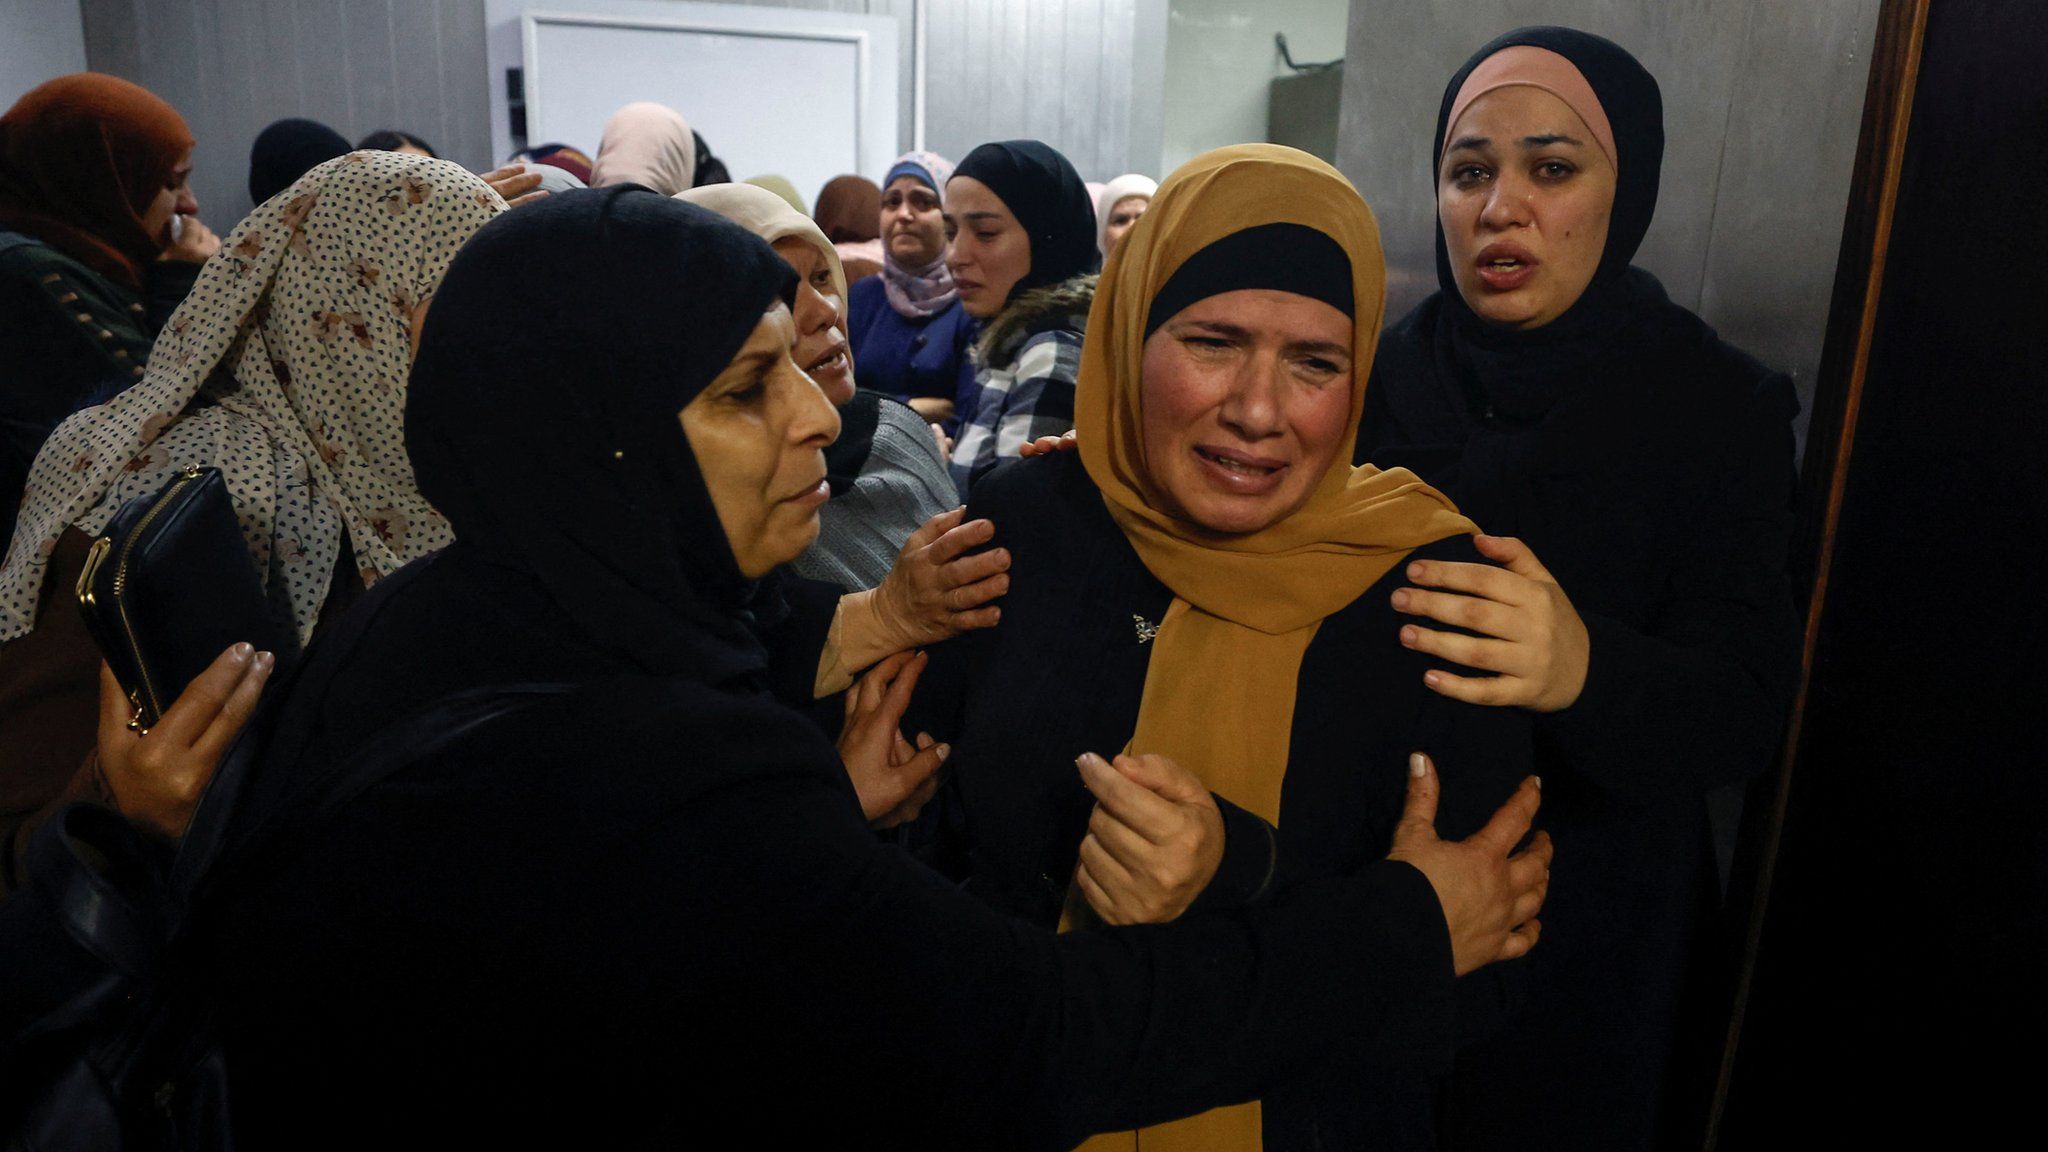 The mother of Palestinian brothers Jawad Rimawi, 22, and Thafer Rimawi, 21, mourns at a hospital in Ramallah before their funerals (29 November 2022)